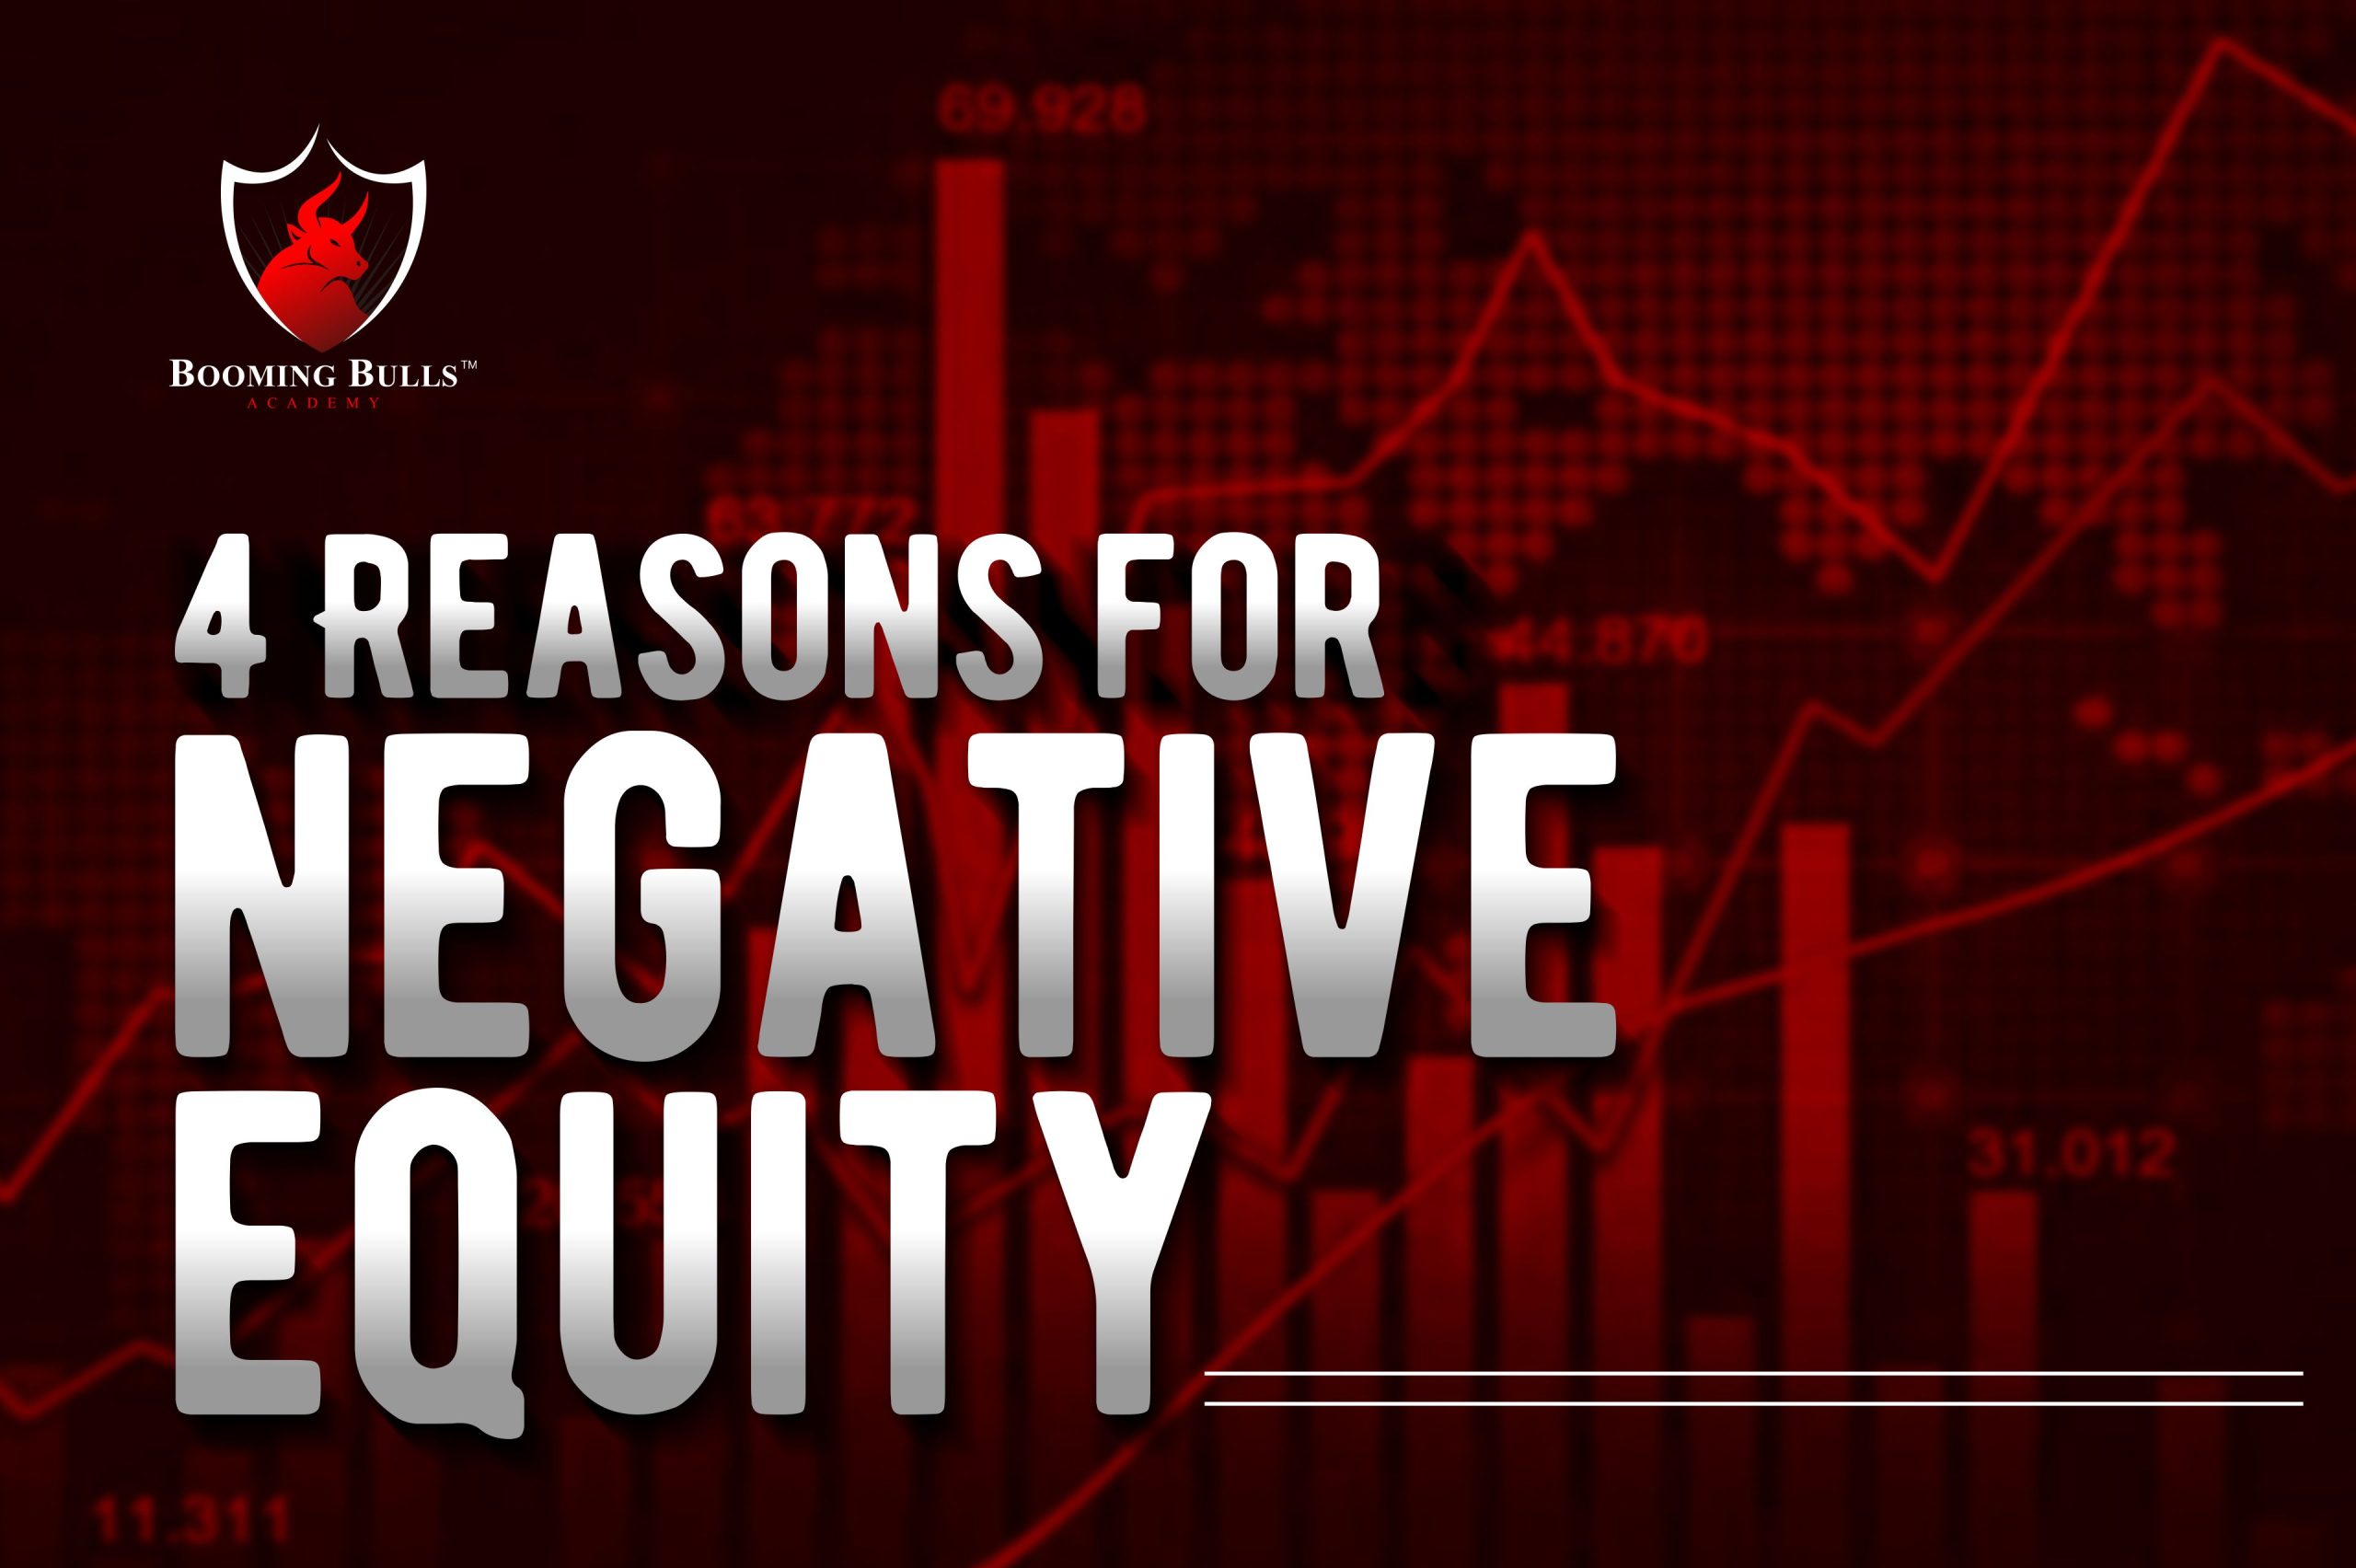 4 Reasons for Negative Equity